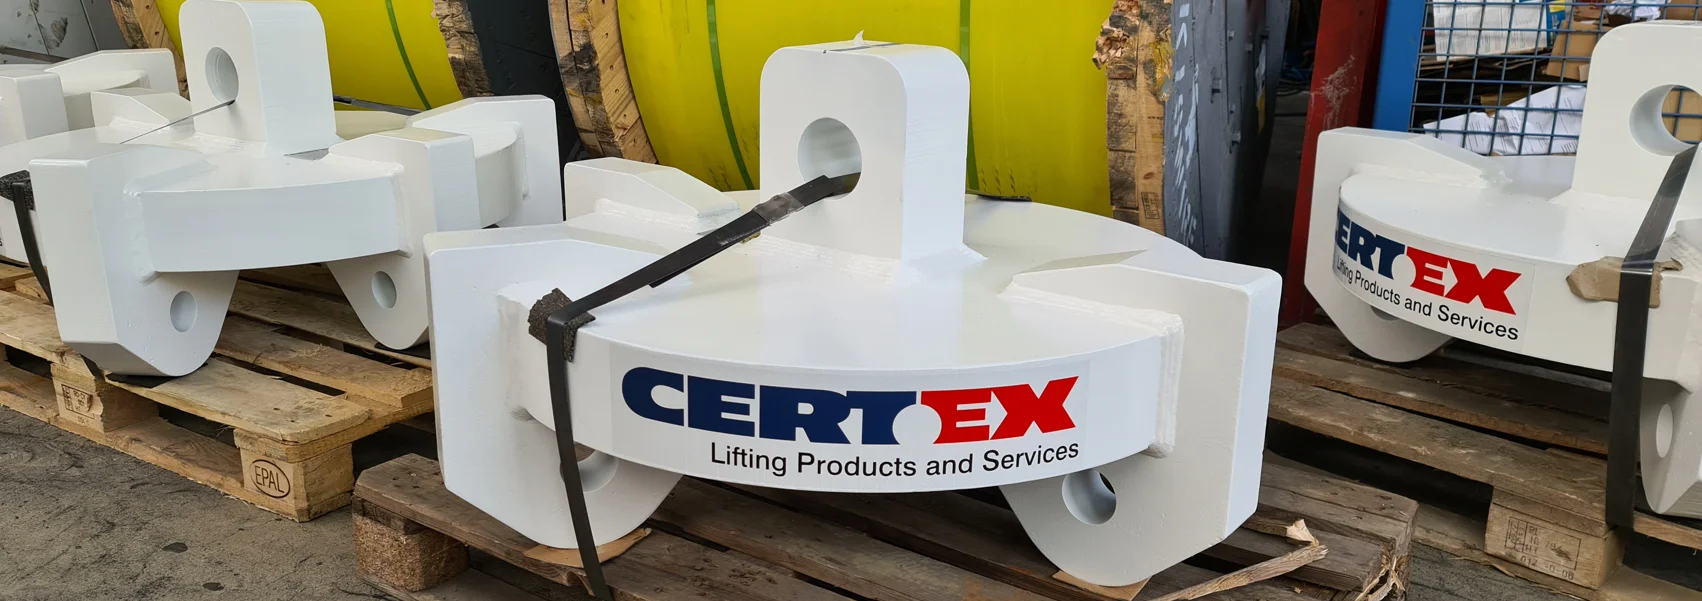 lifting gear by certex in productionhall